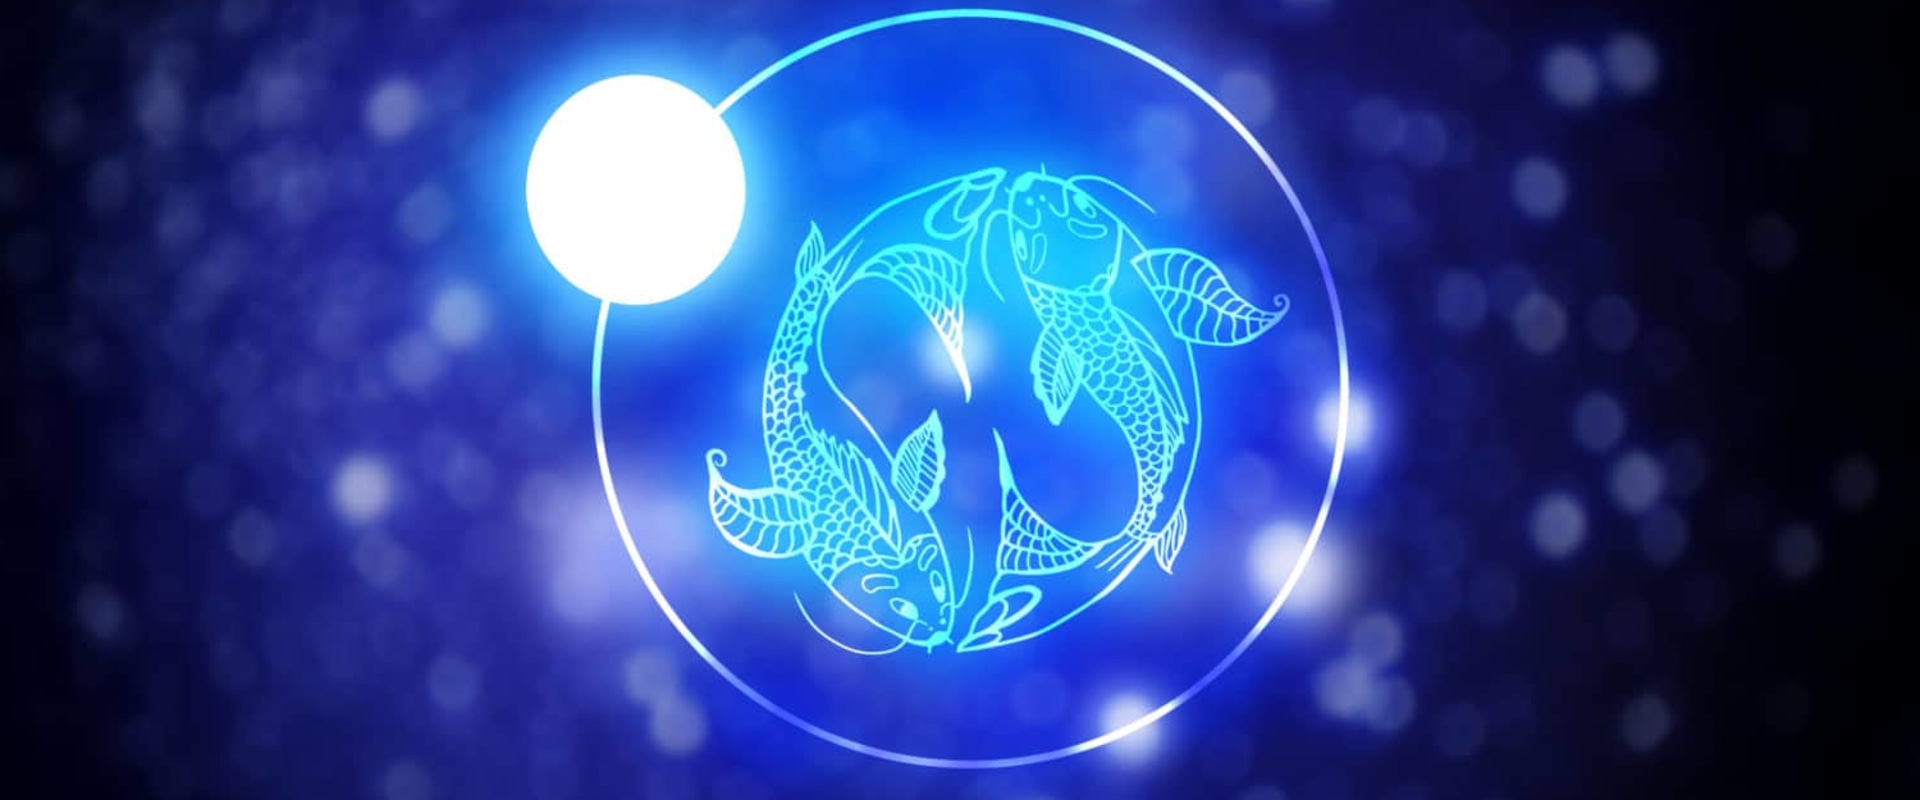 Pisces Compatibility - Understanding the Zodiac Sign's Compatibility